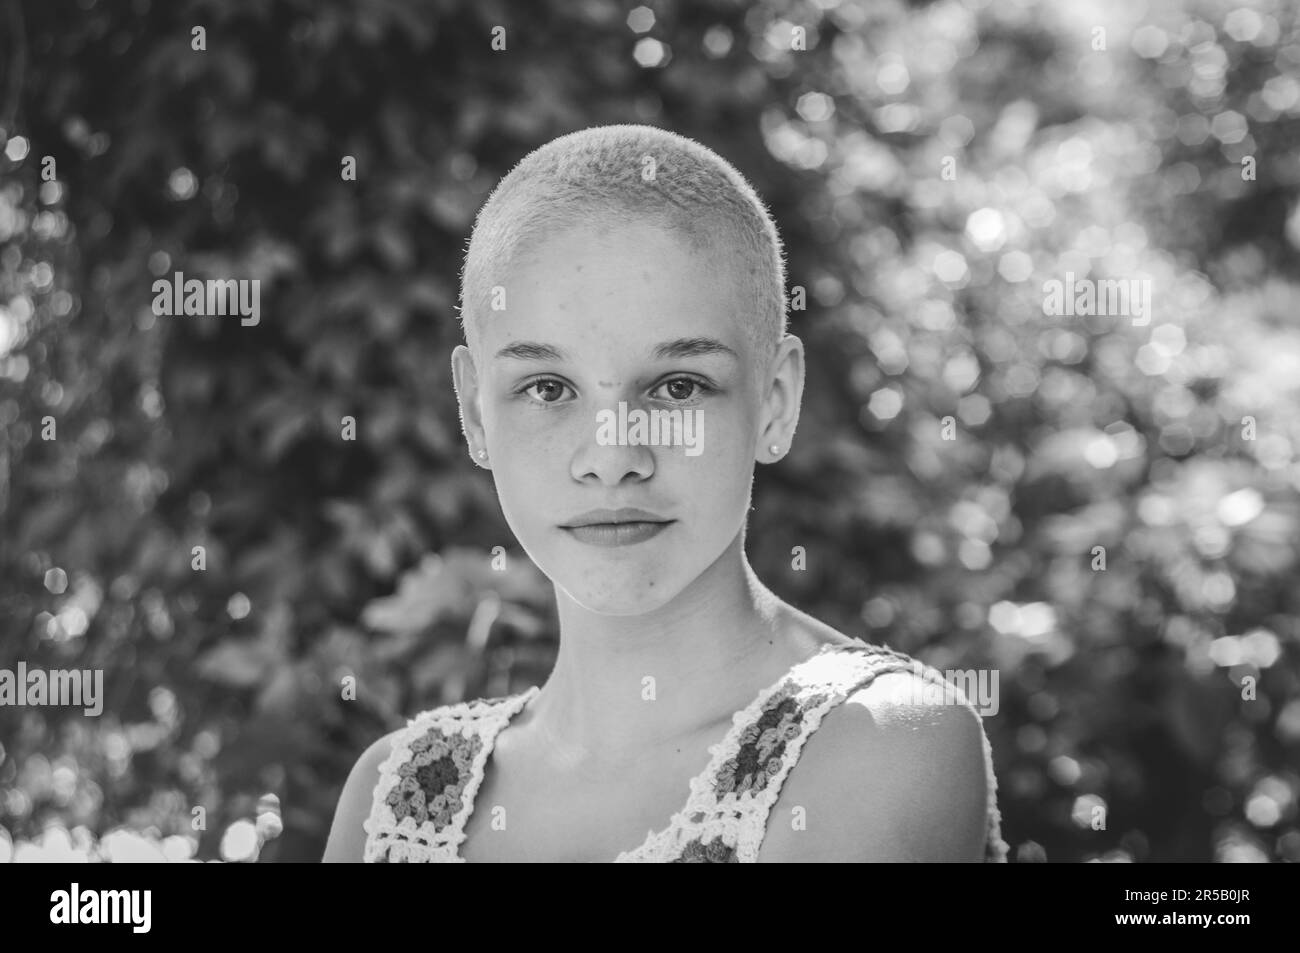 Portrait of a girl with very short hair. Black and white portrait. Stock Photo